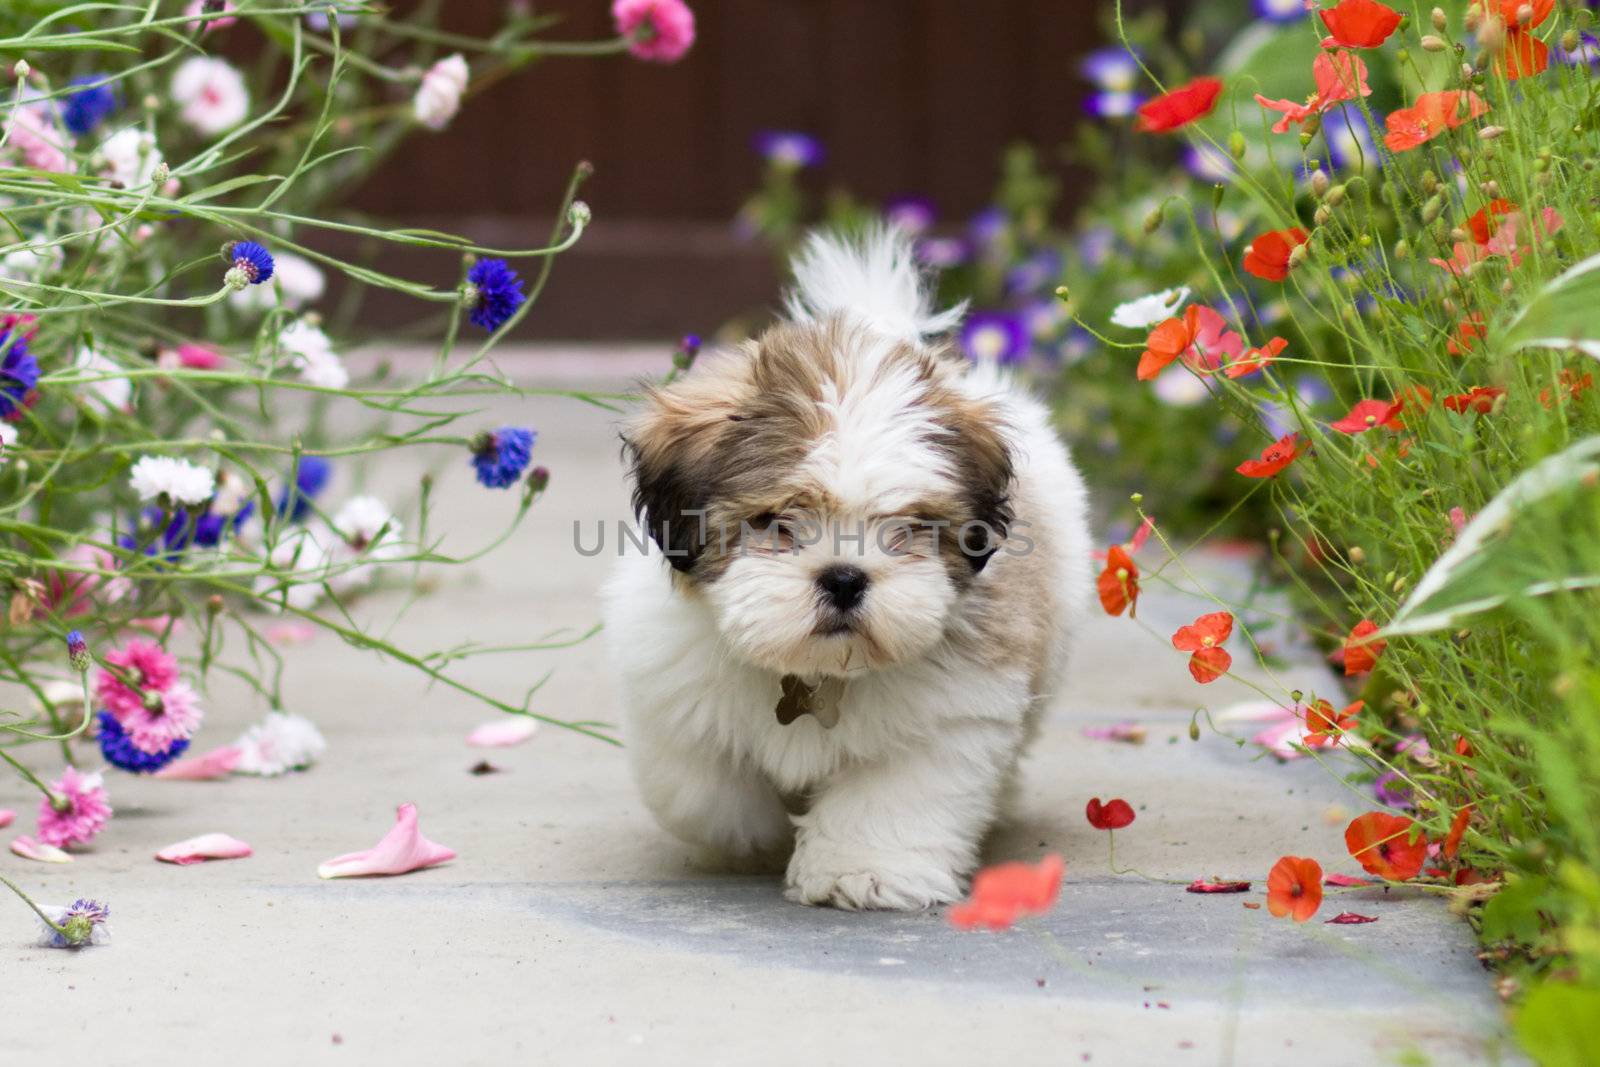 Cute lhasa apso puppy amongst poppies and cornflowers